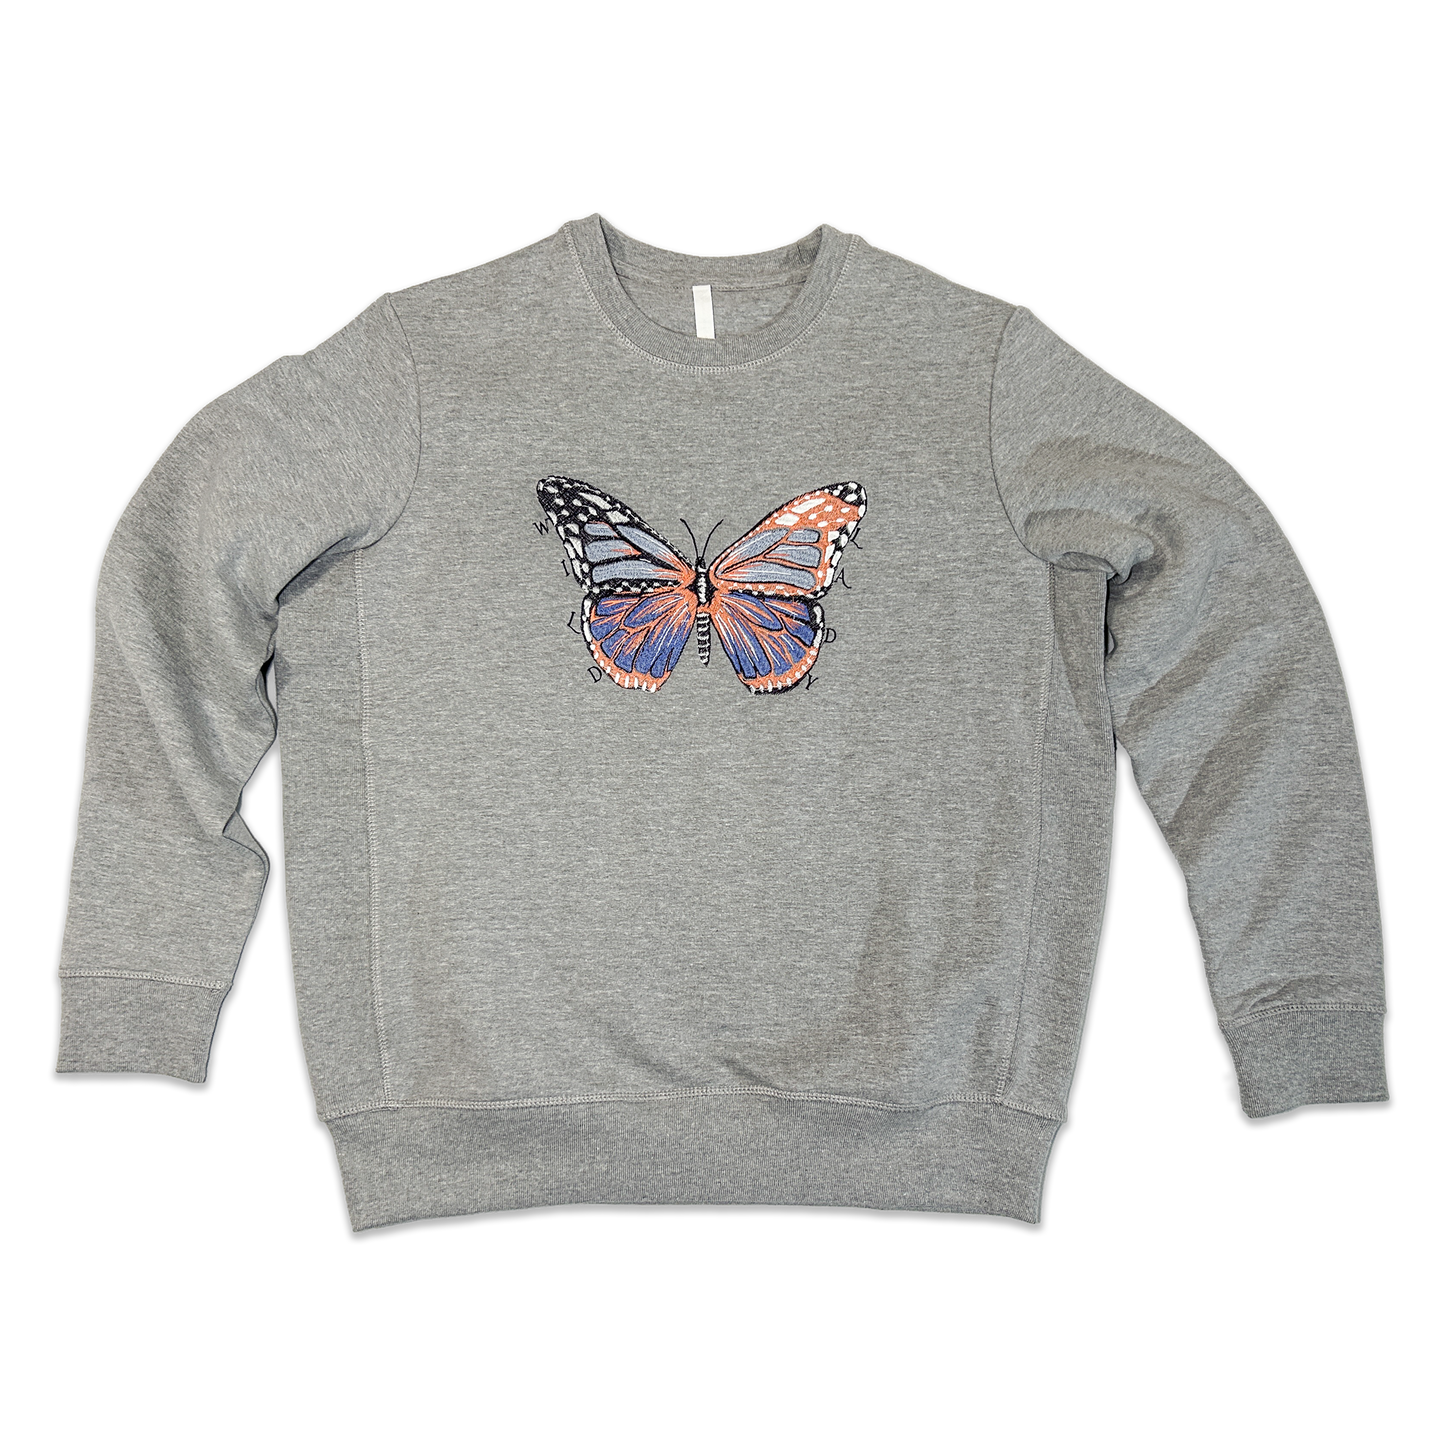 Wild Lady Embroidered Butterfly Sweatshirt in Heather Gray